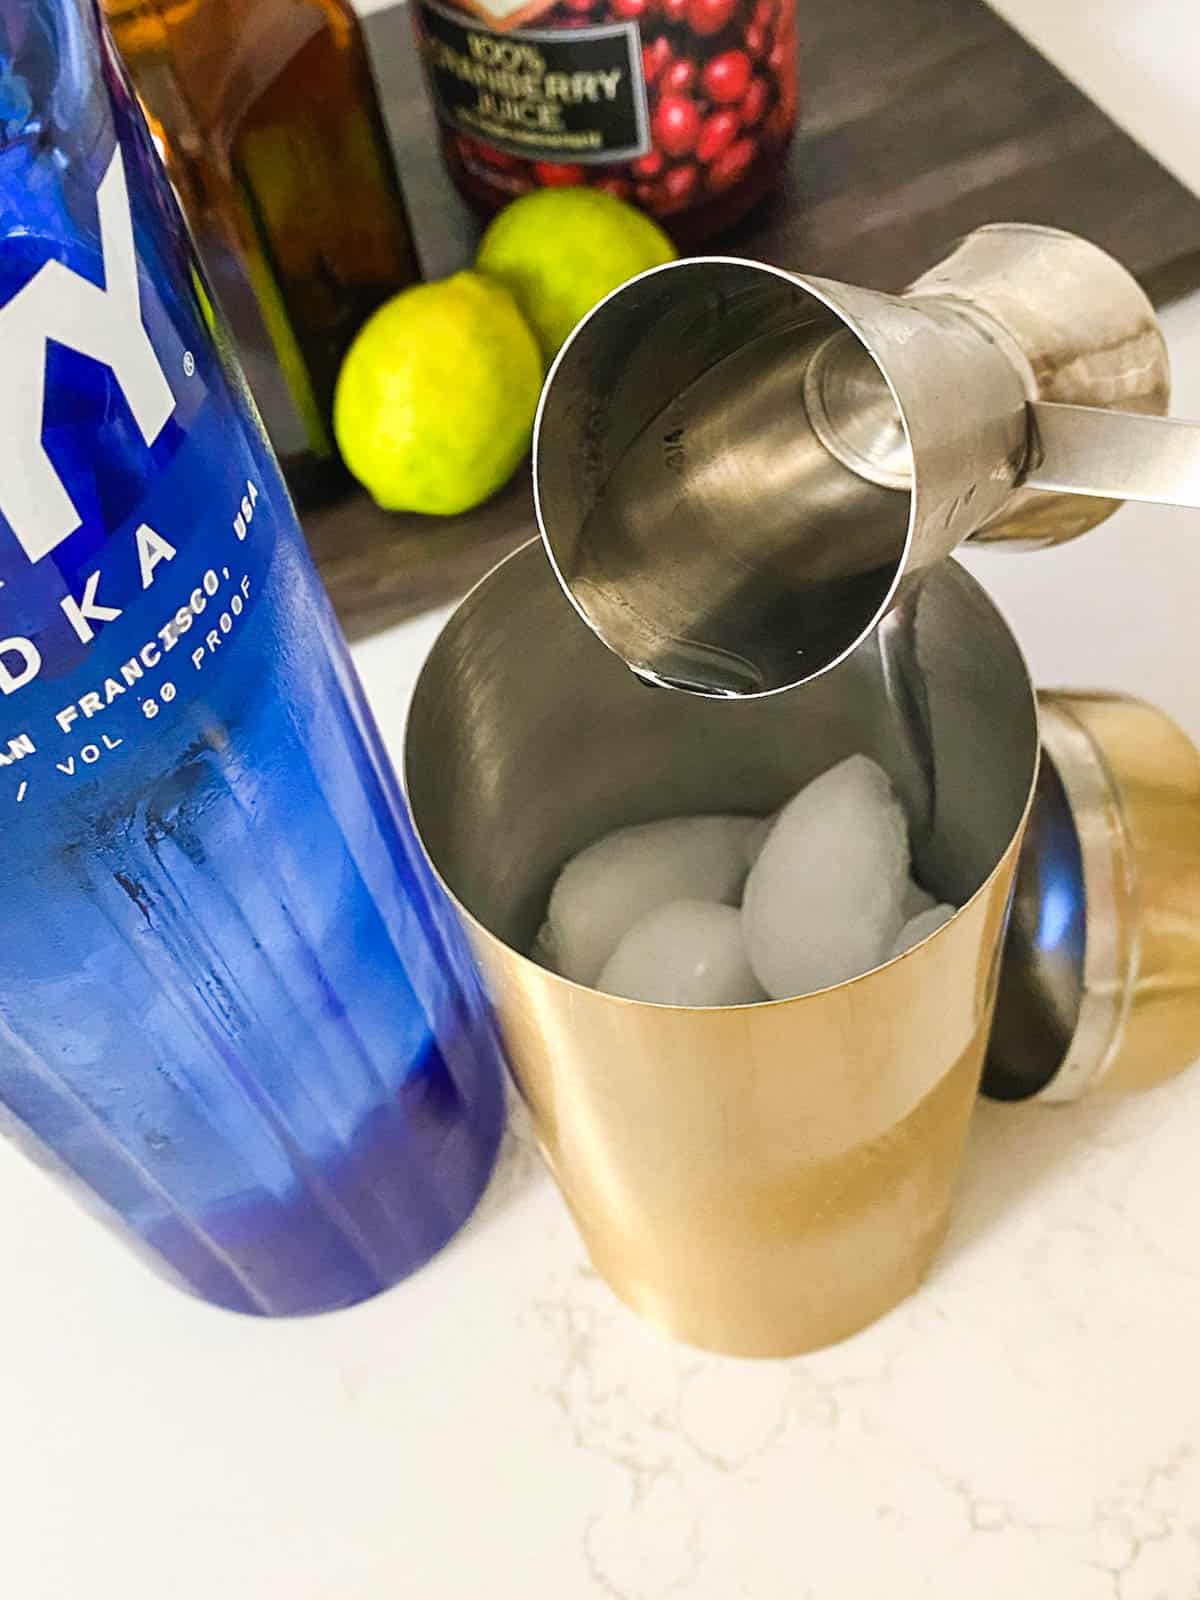 Vodka being poured into a cocktail shaker.